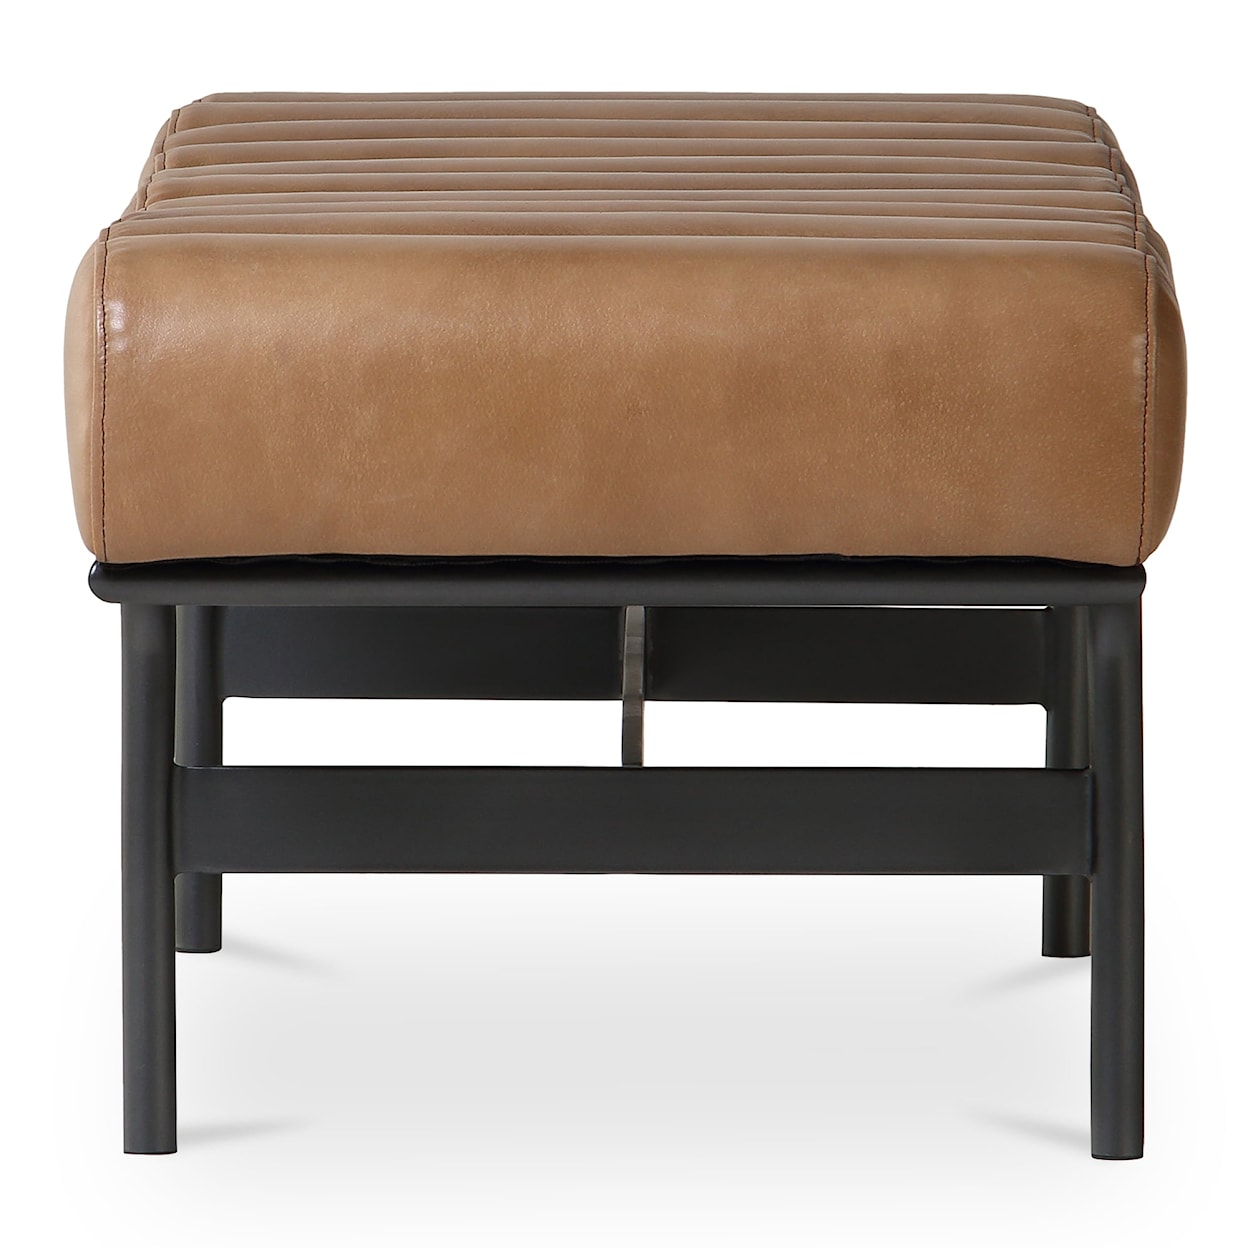 Moe's Home Collection Harrison Tan Bench